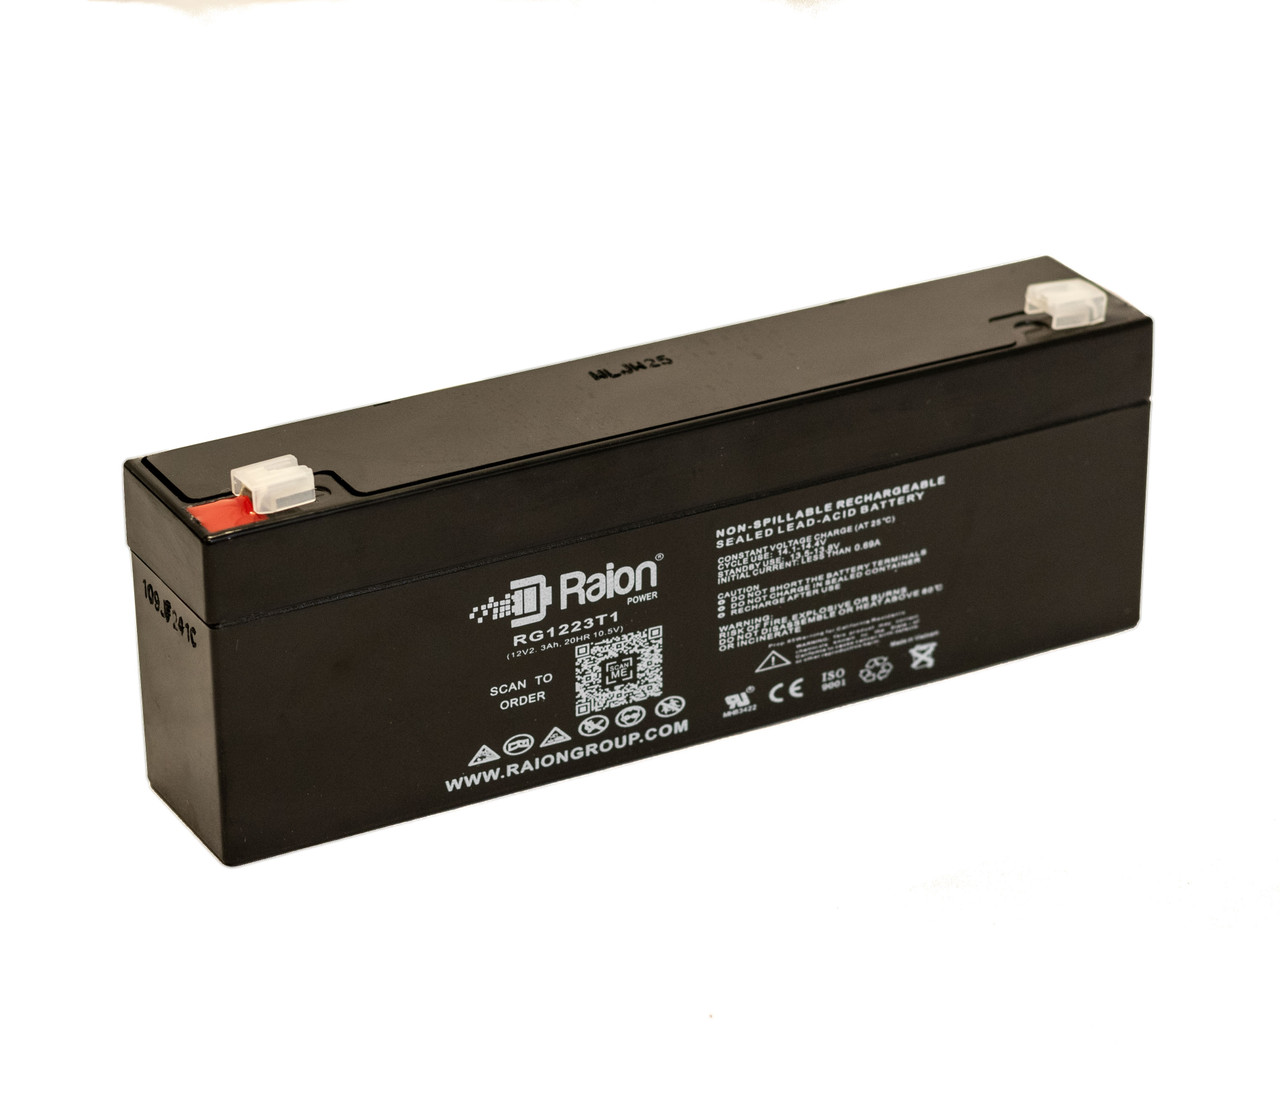 Raion Power RG1223T1 Replacement Battery for MK BMED11214